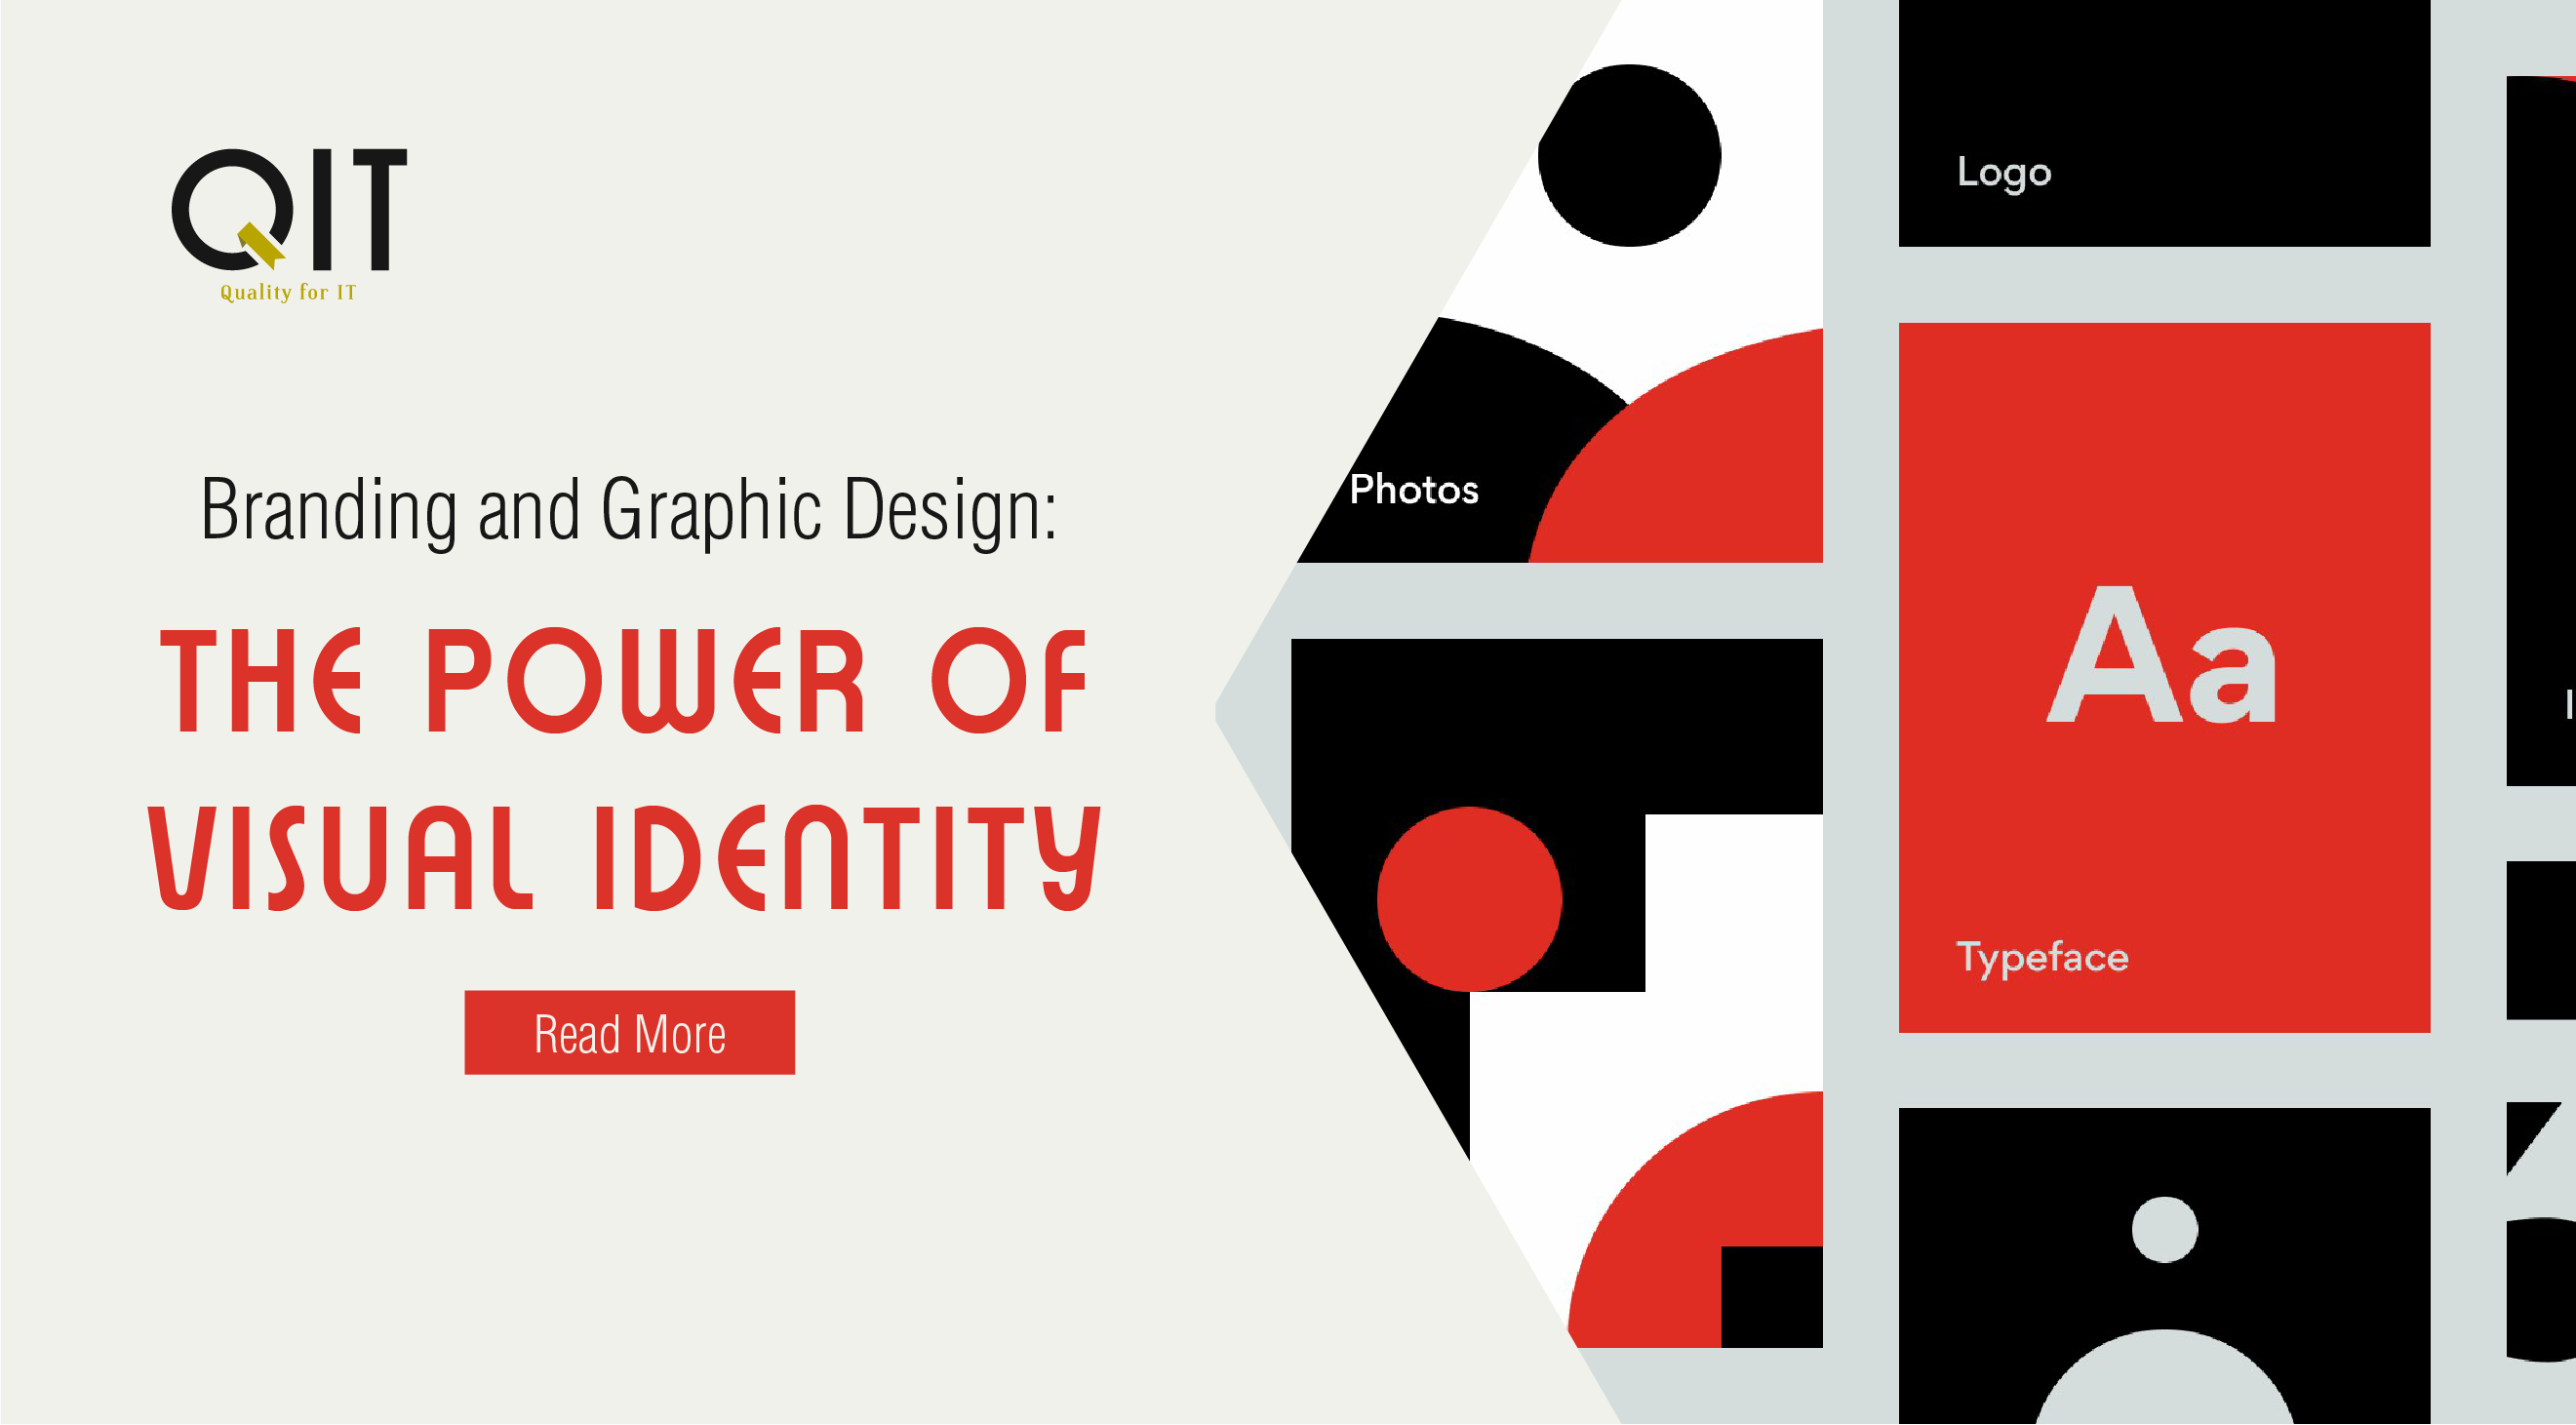 Branding and Graphic Design: The Power of Visual Identity